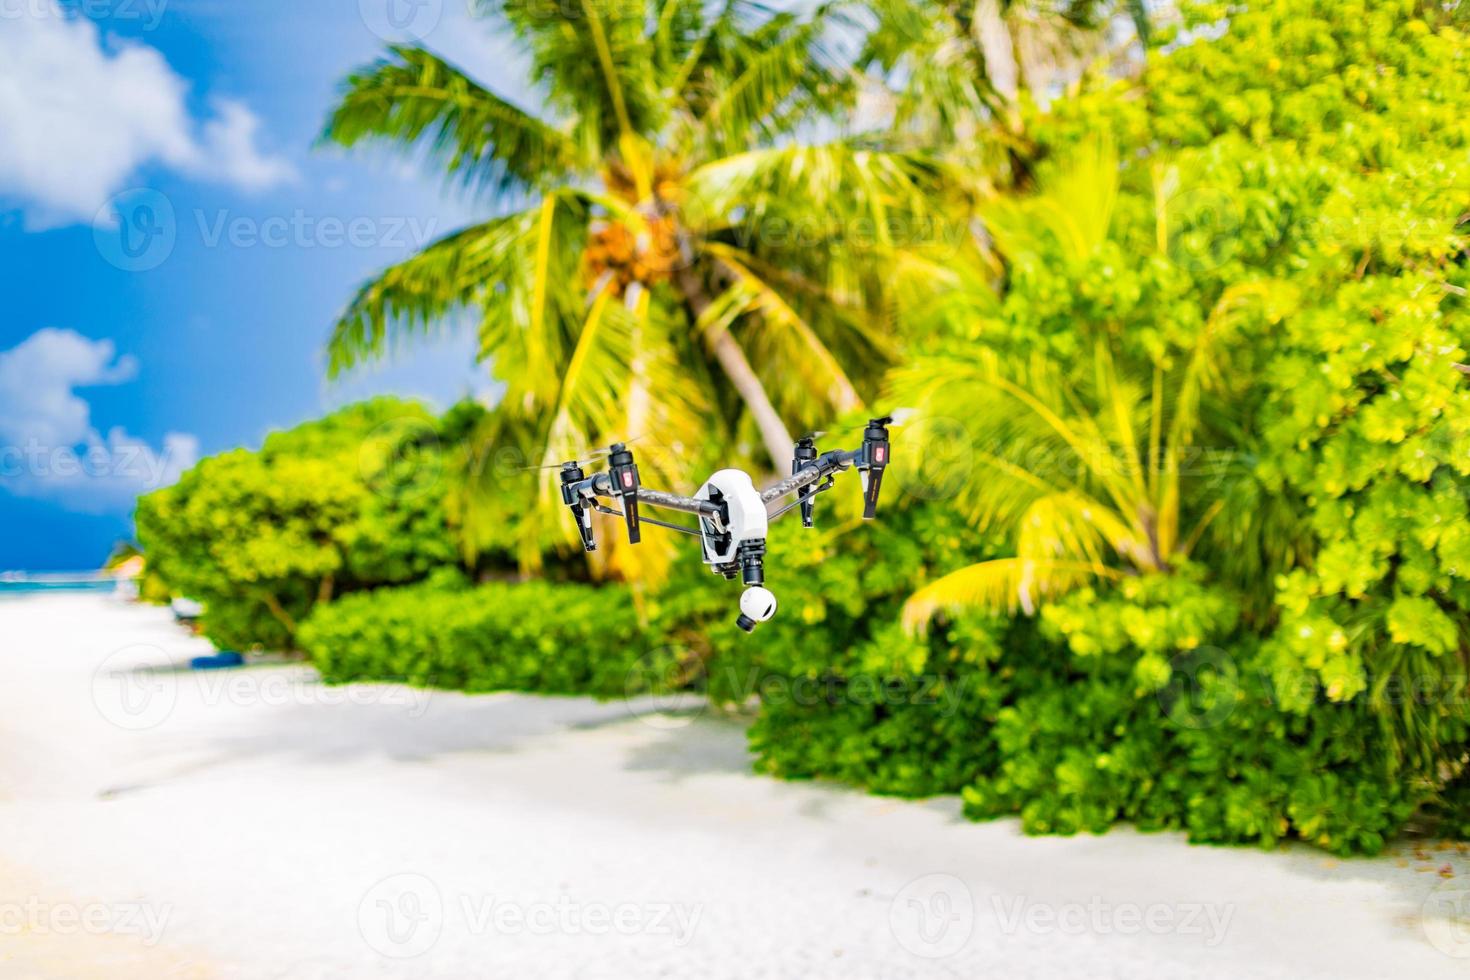 Professional drone quadcopter with digital camera on tropical beach. Taking footage of honeymoon location and tourist vacation content. Digital technology for special locations photo